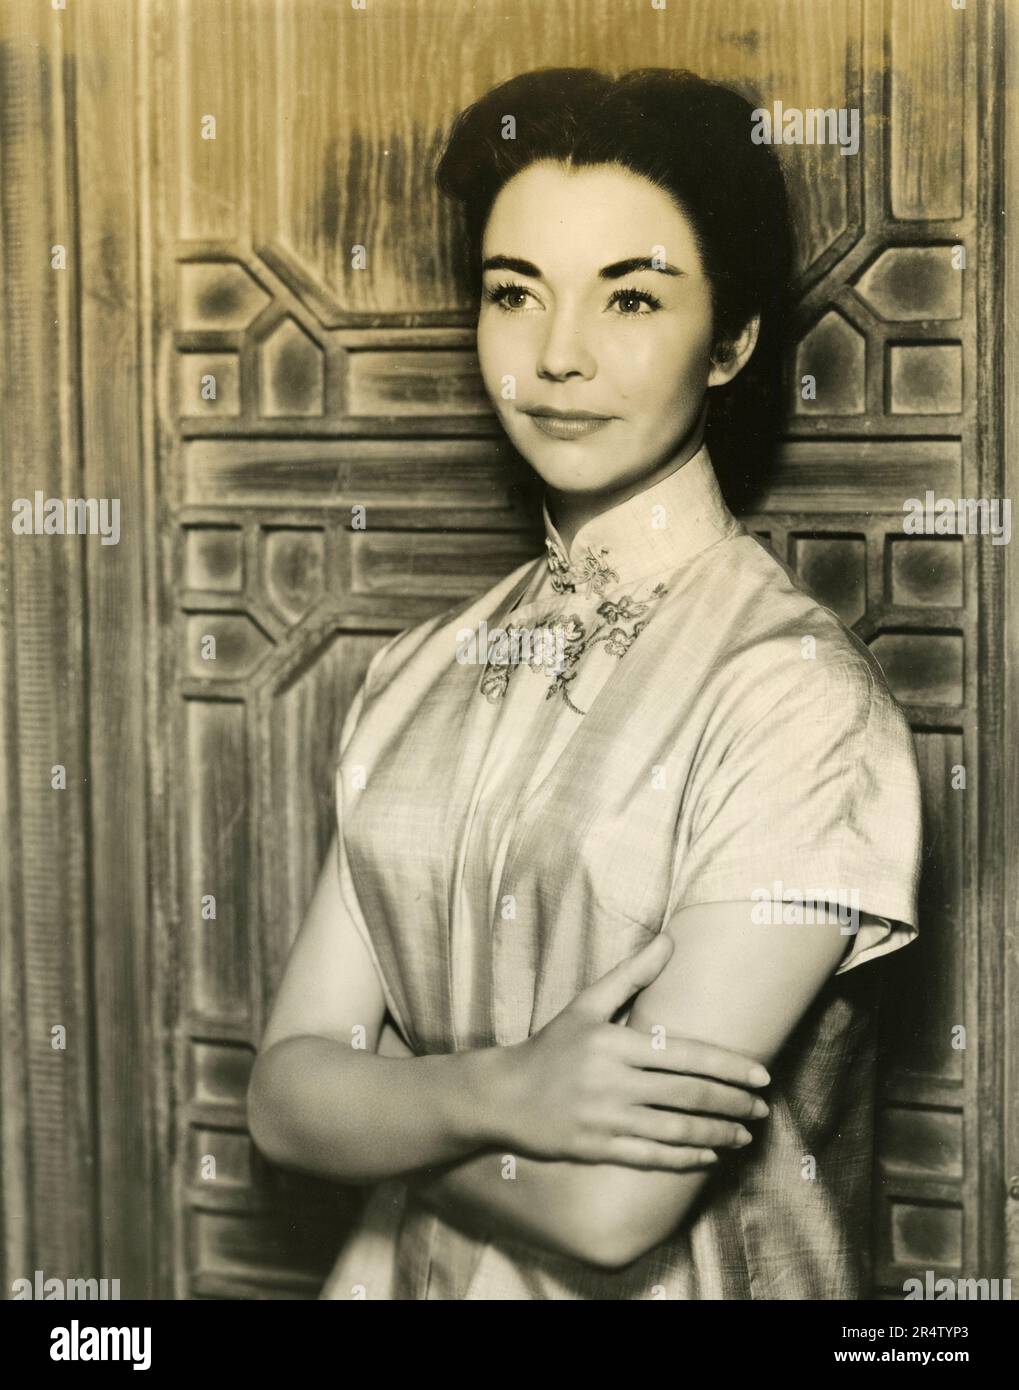 American actress Jennifer Jones in the movie Love Is a Many-Splendored Thing, USA 1955 Stock Photo